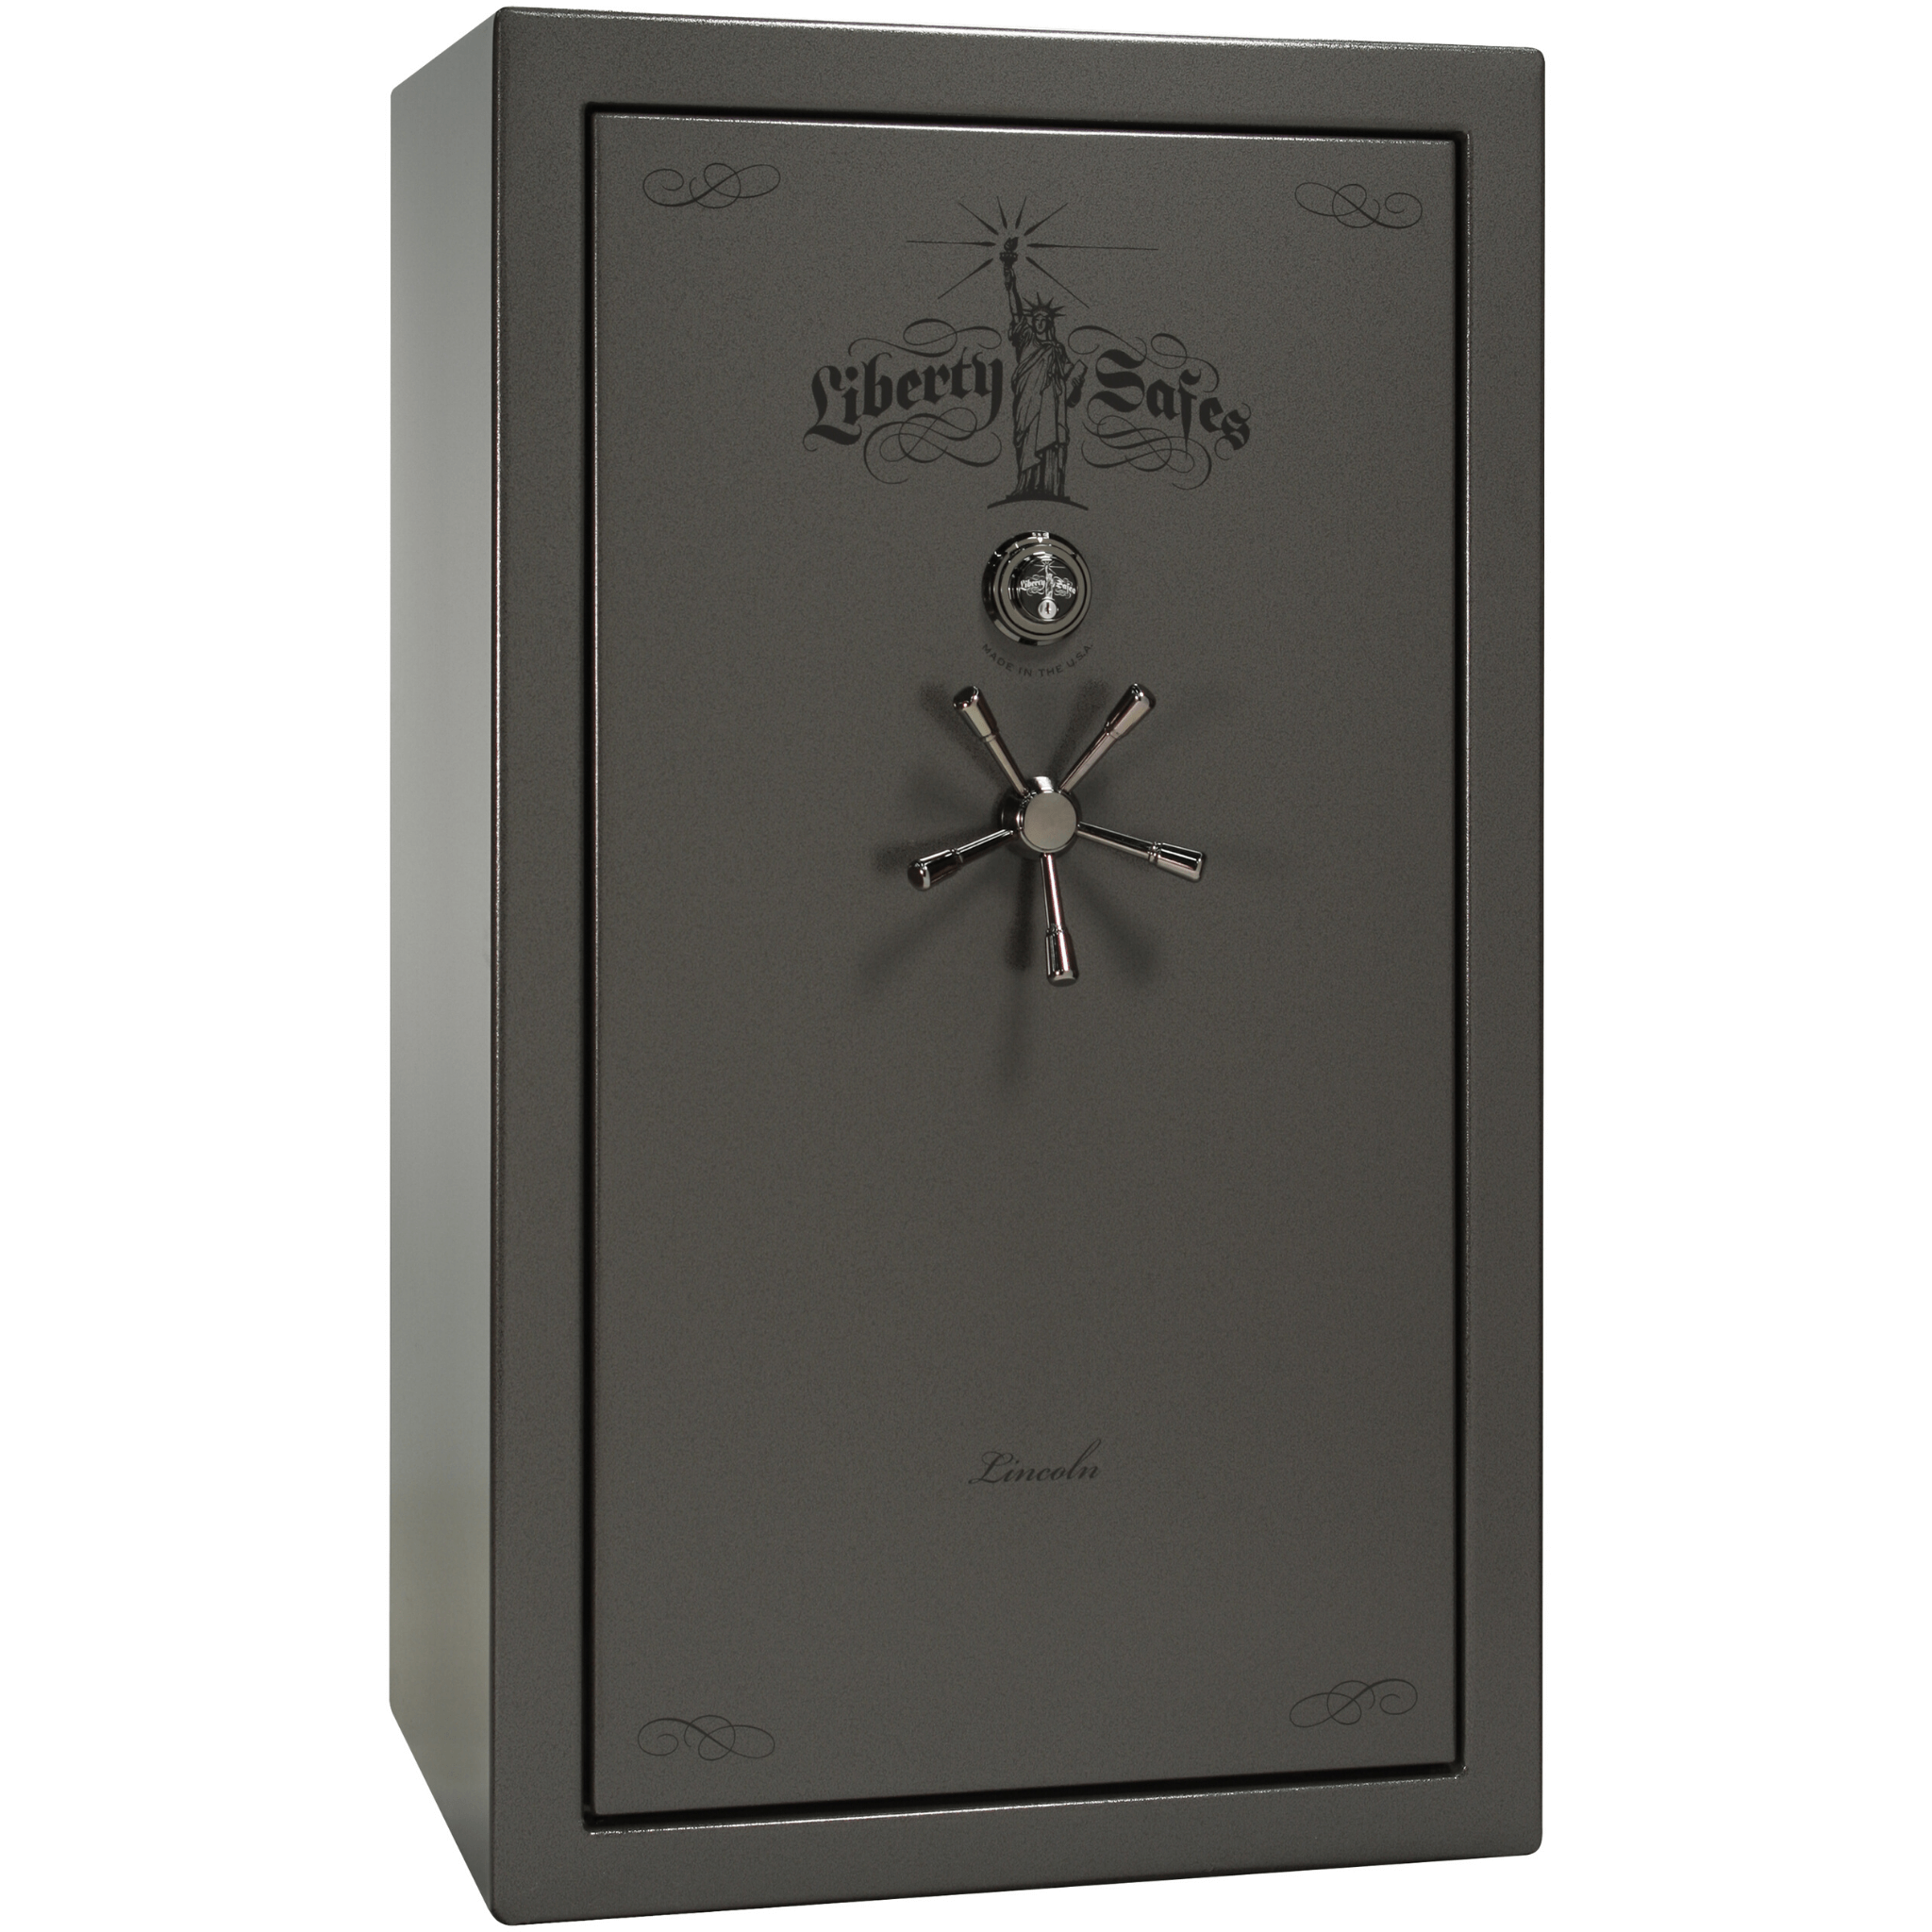 Lincoln Series | Level 5 Security | 110 Minute Fire Protection | 50 | Dimensions: 72.5"(H) x 42"(W) x 32"(D) | Black Gloss | Mechanical Lock, photo 47